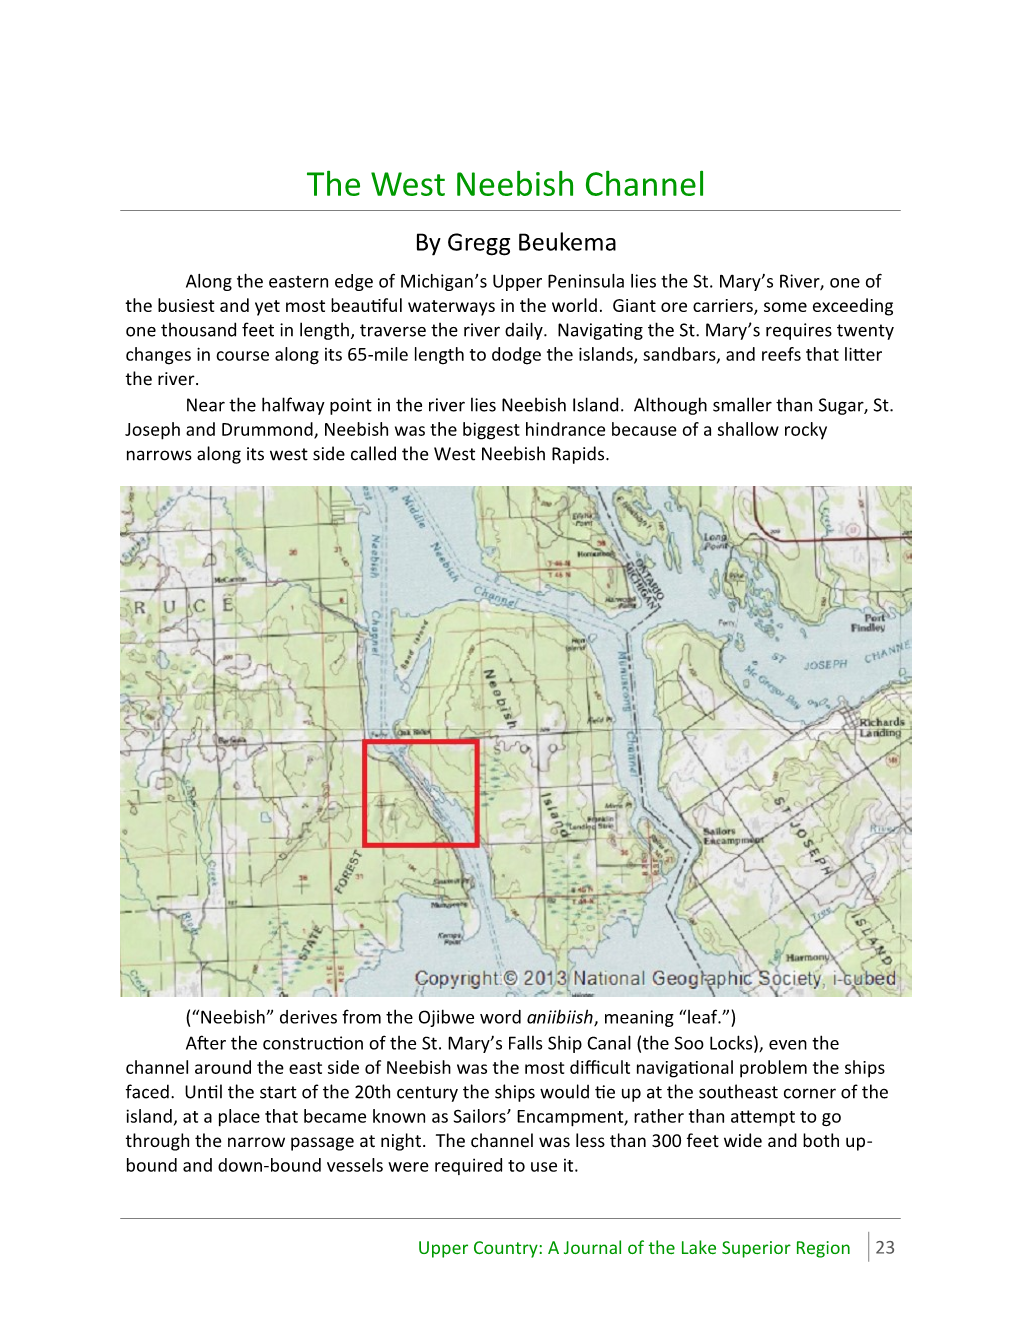 The West Neebish Channel by Gregg Beukema Along the Eastern Edge of Michigan’S Upper Peninsula Lies the St